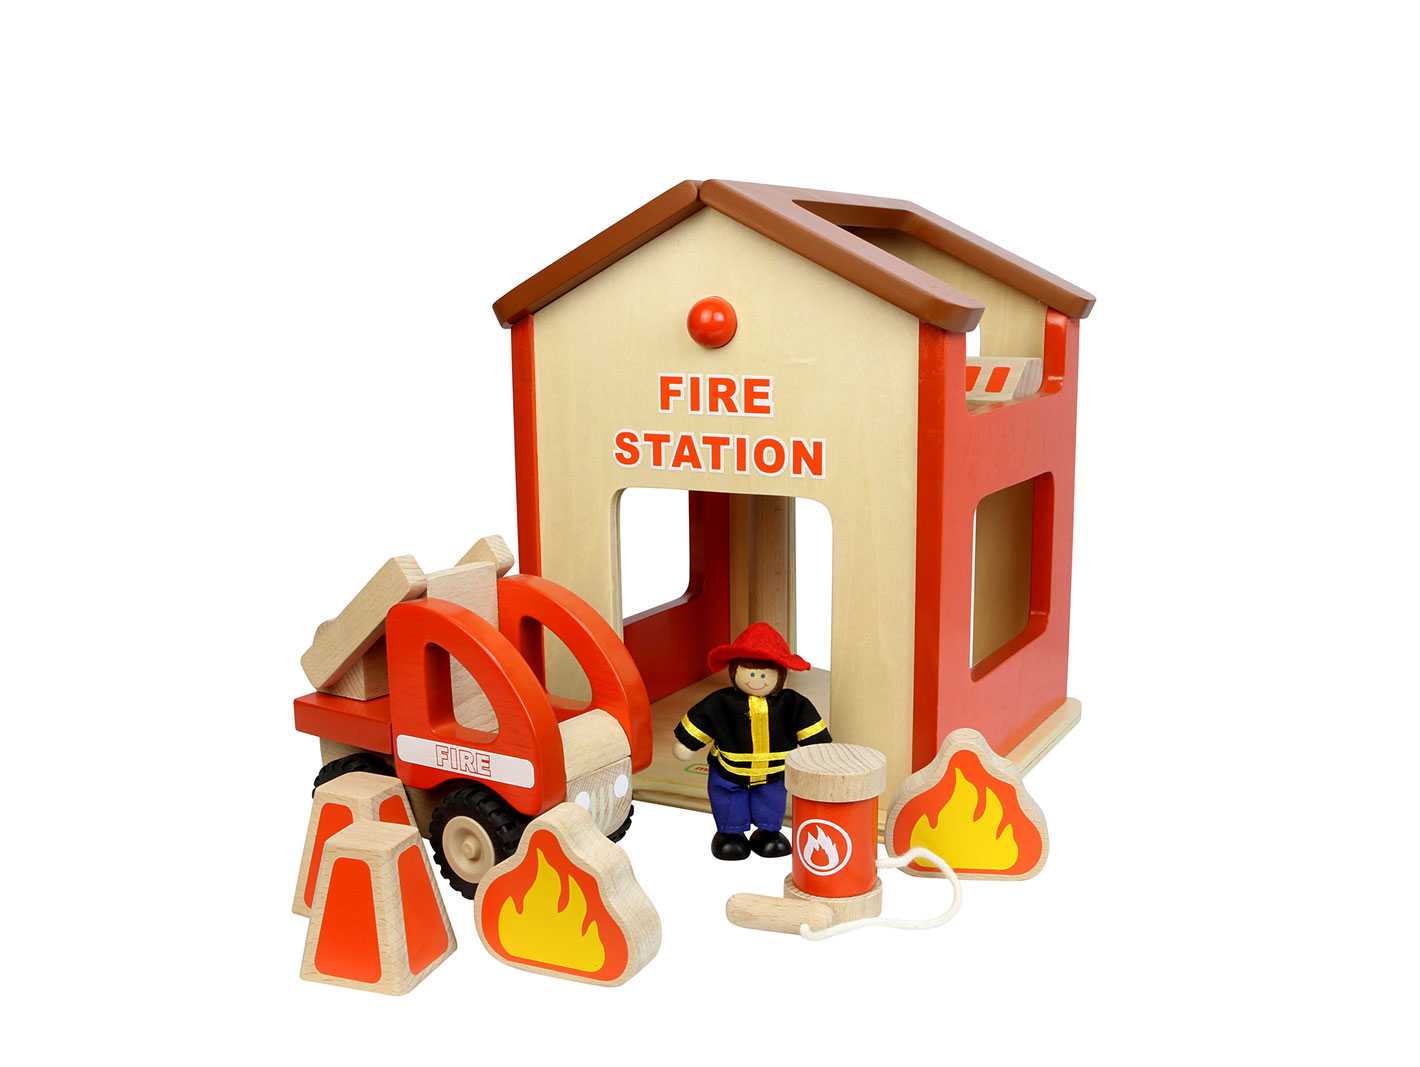 Masterkidz beiside small wooden fire station game toys1